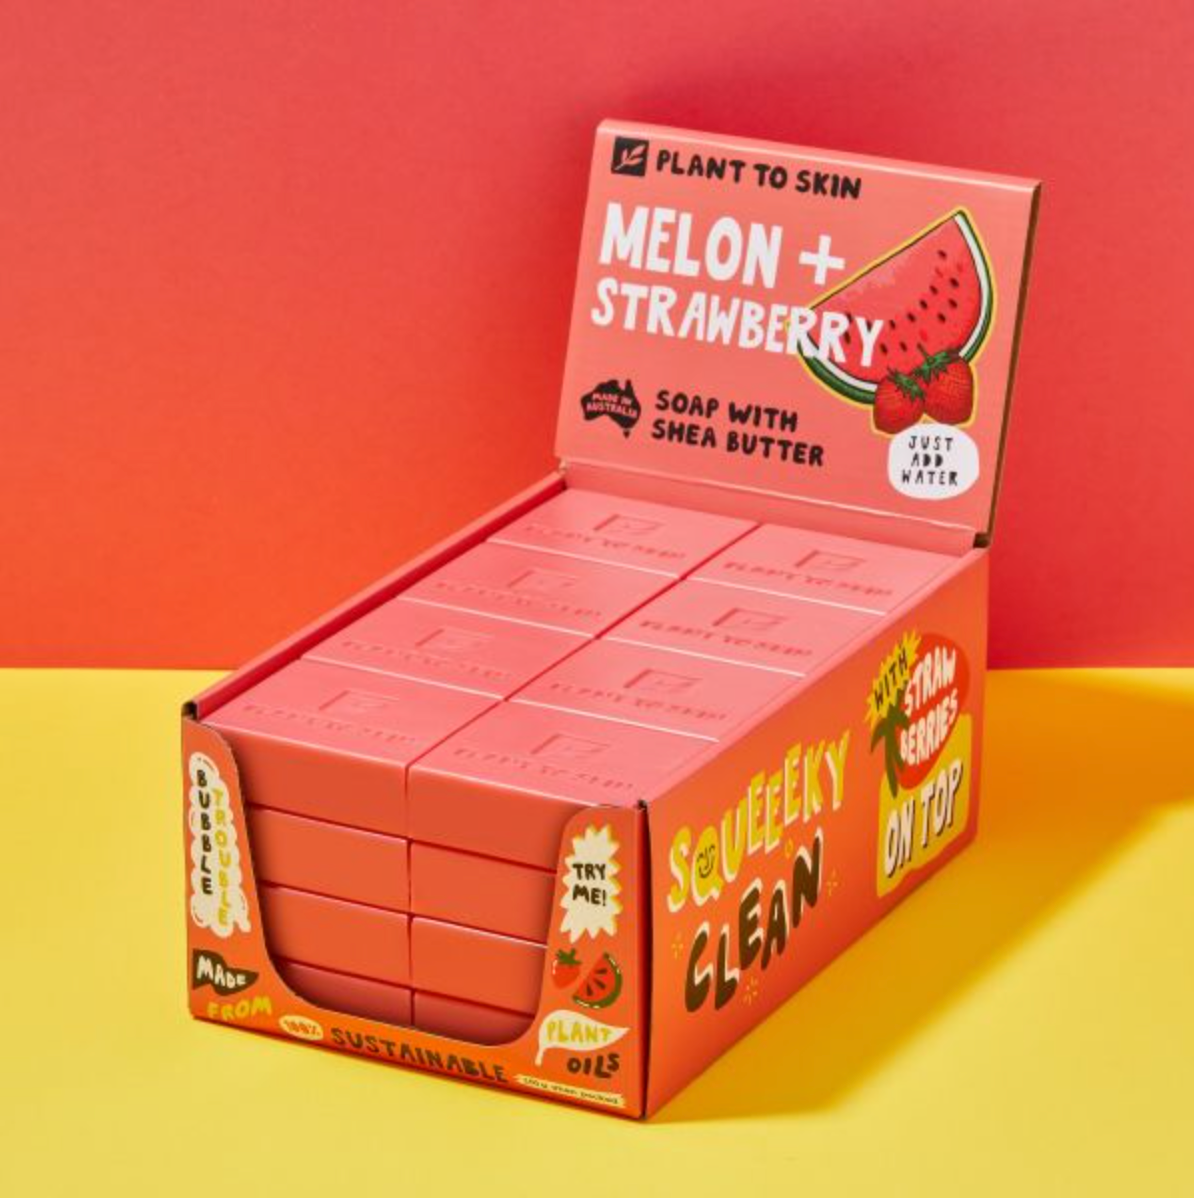 Plant to Skin Melon and Strawberry Soap 32x100g Carton